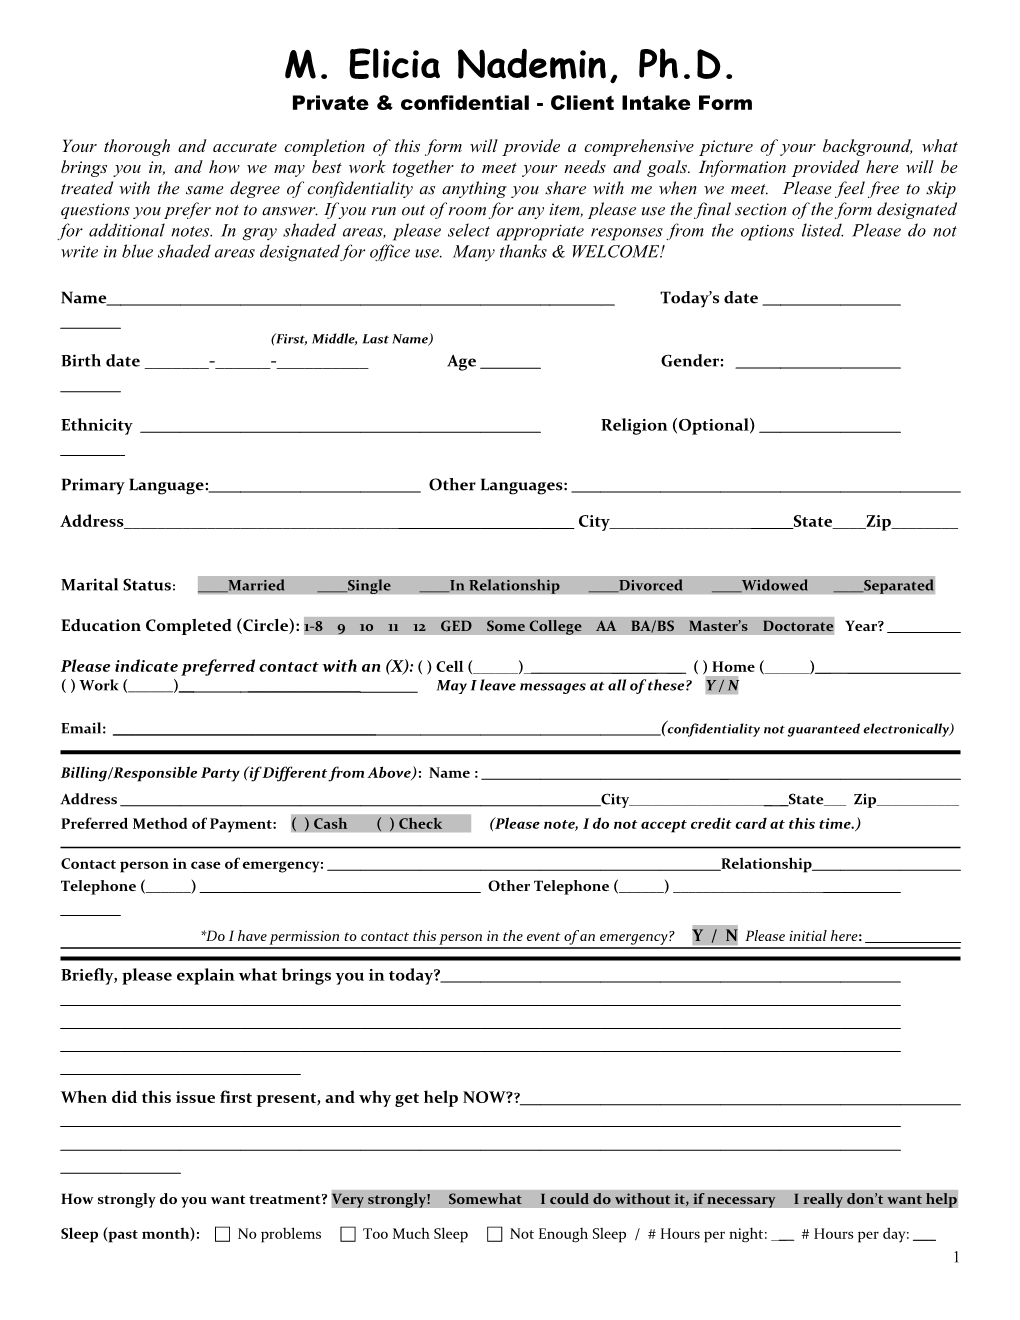 Private & Confidential - Clientintake Form